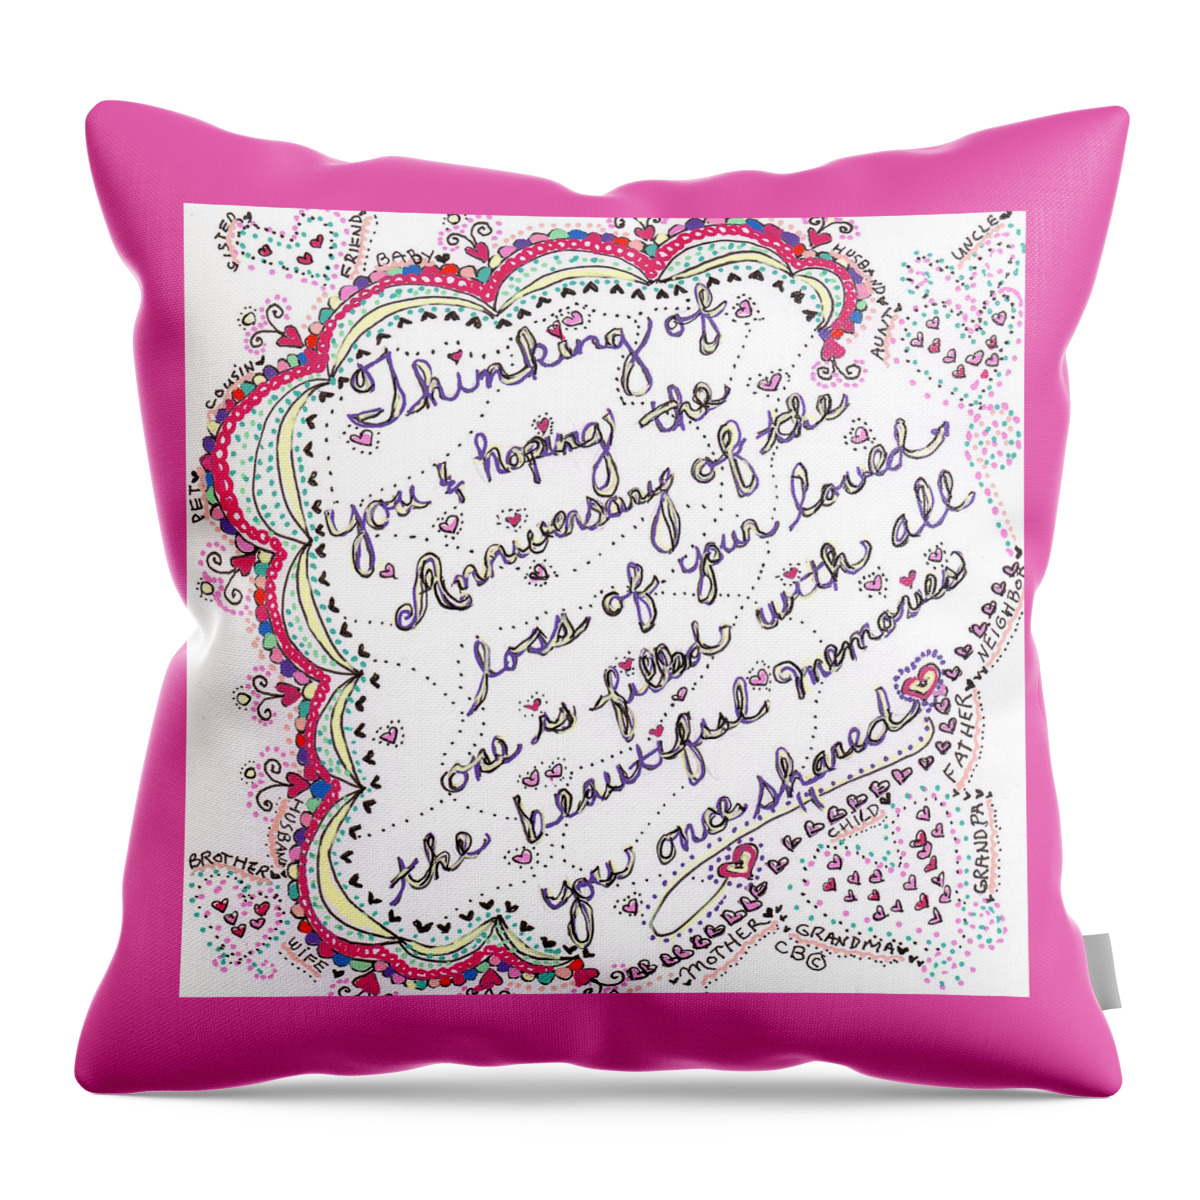 Caregiver Throw Pillow featuring the drawing Anniversary Memorial by Carole Brecht